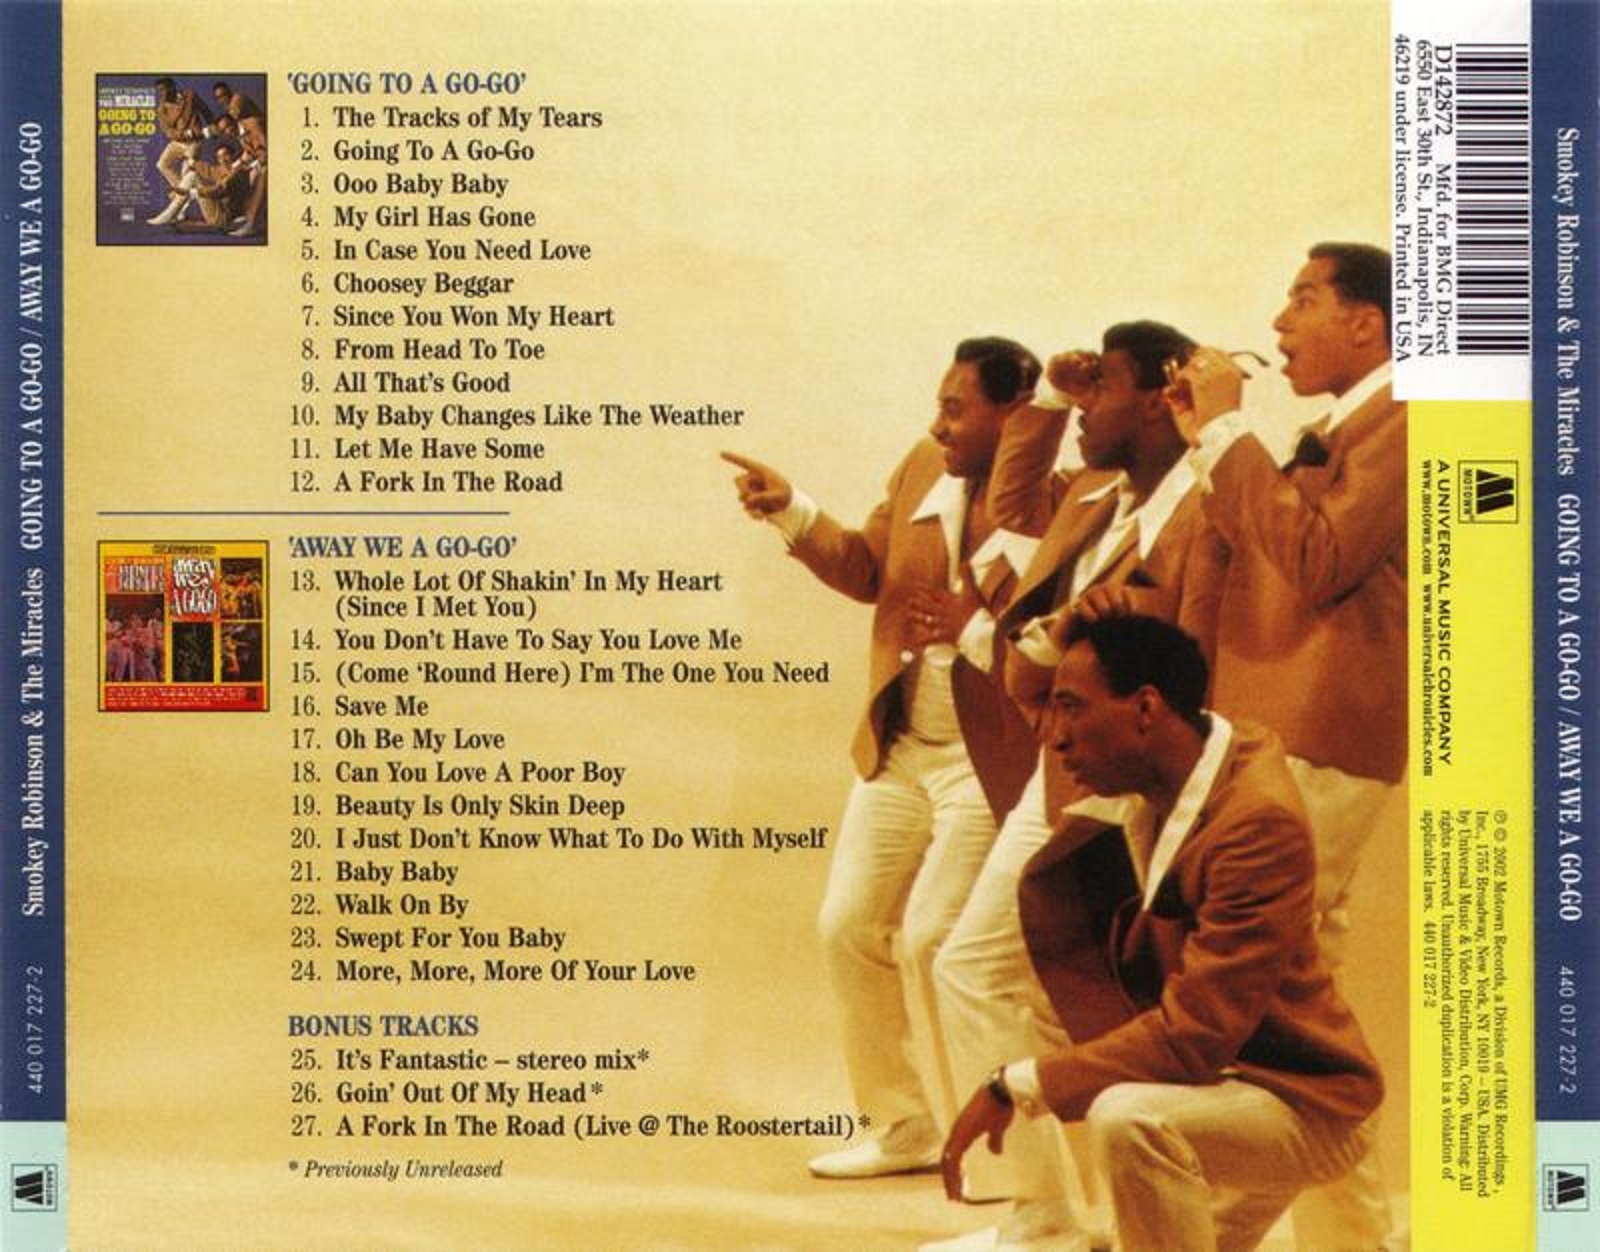 Smokey Robinson & The Miracles - Going To A Go-Go (1964) Away We A-Go-Go (1965) .